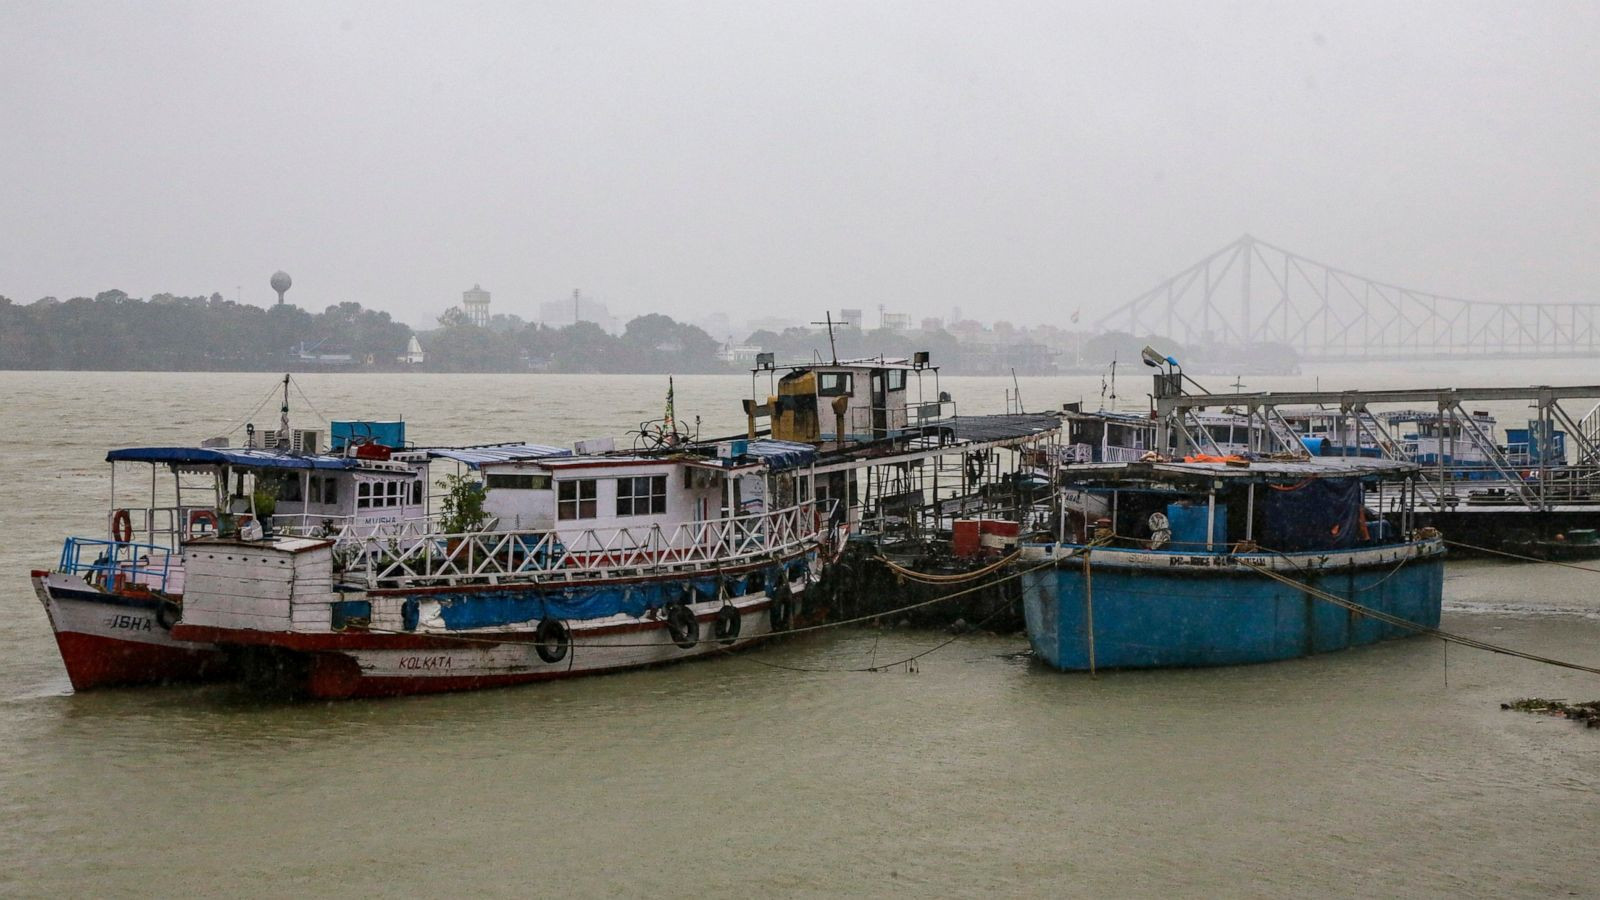 Ferry service suspended in Sundarbans due to bad weather